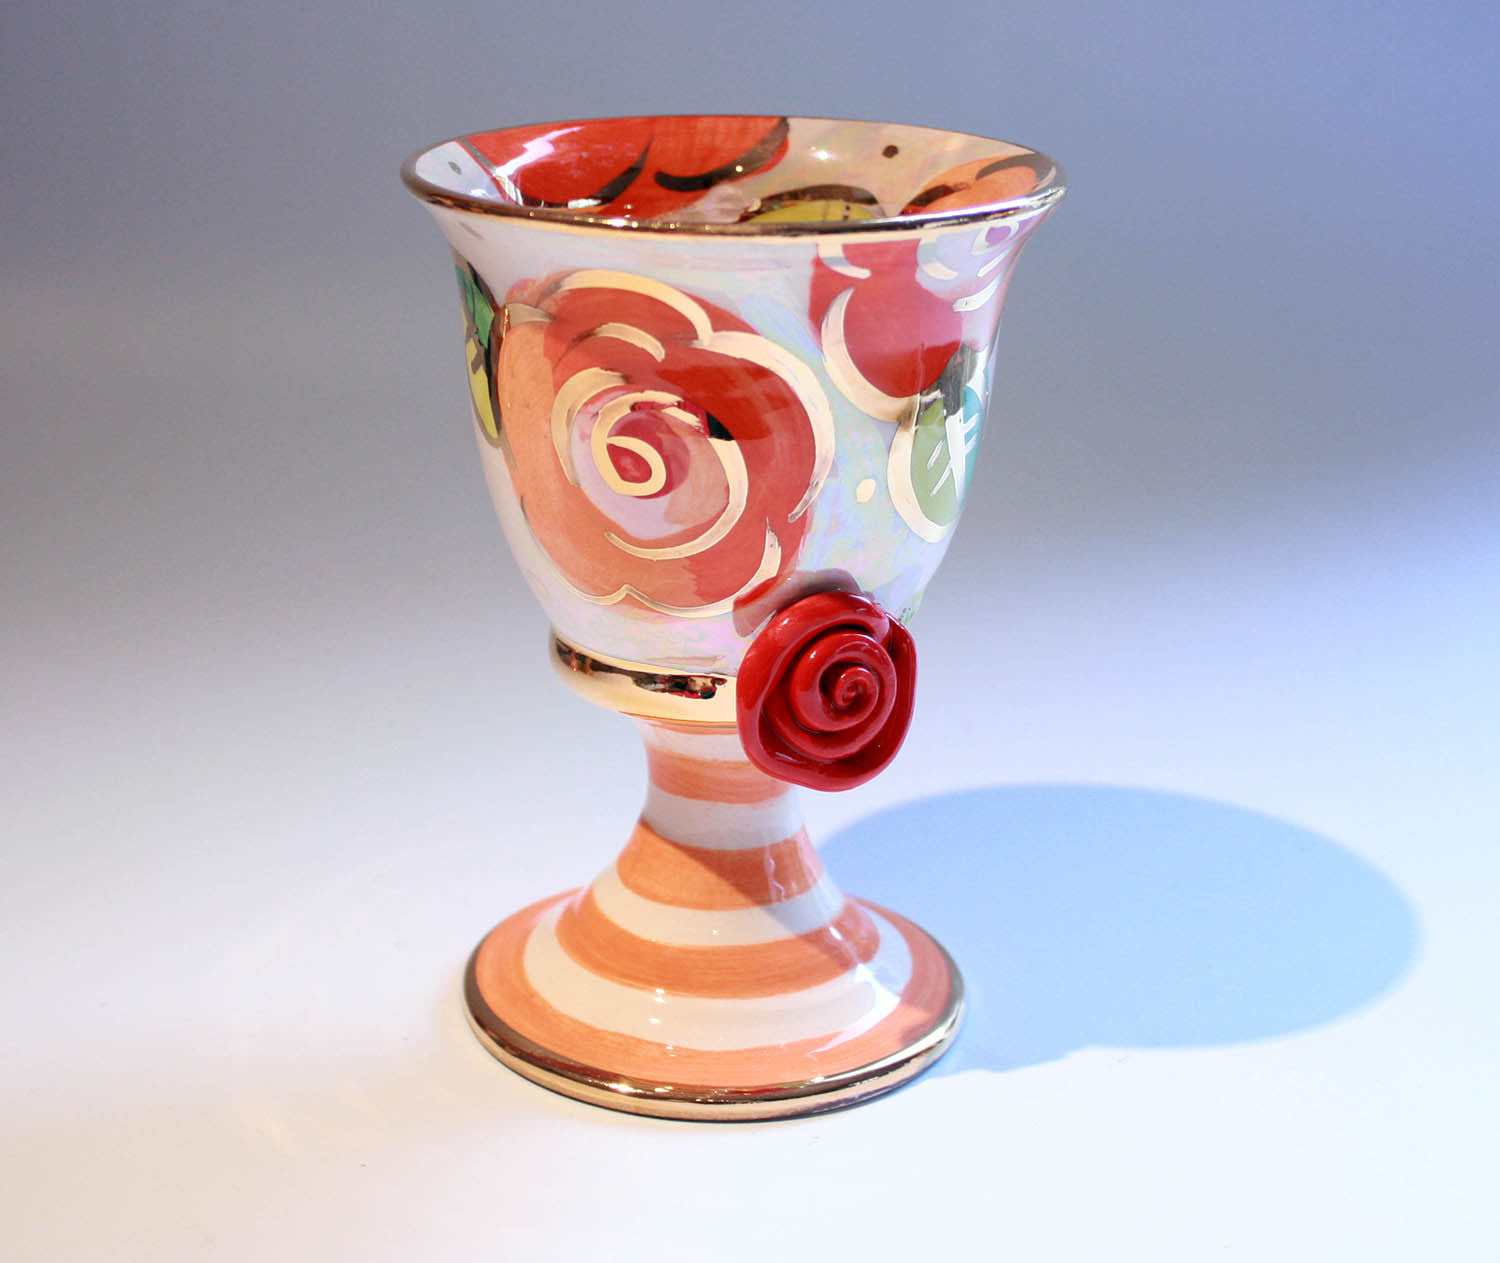 Goblet "Pale Roses Peach" - MaryRoseYoung